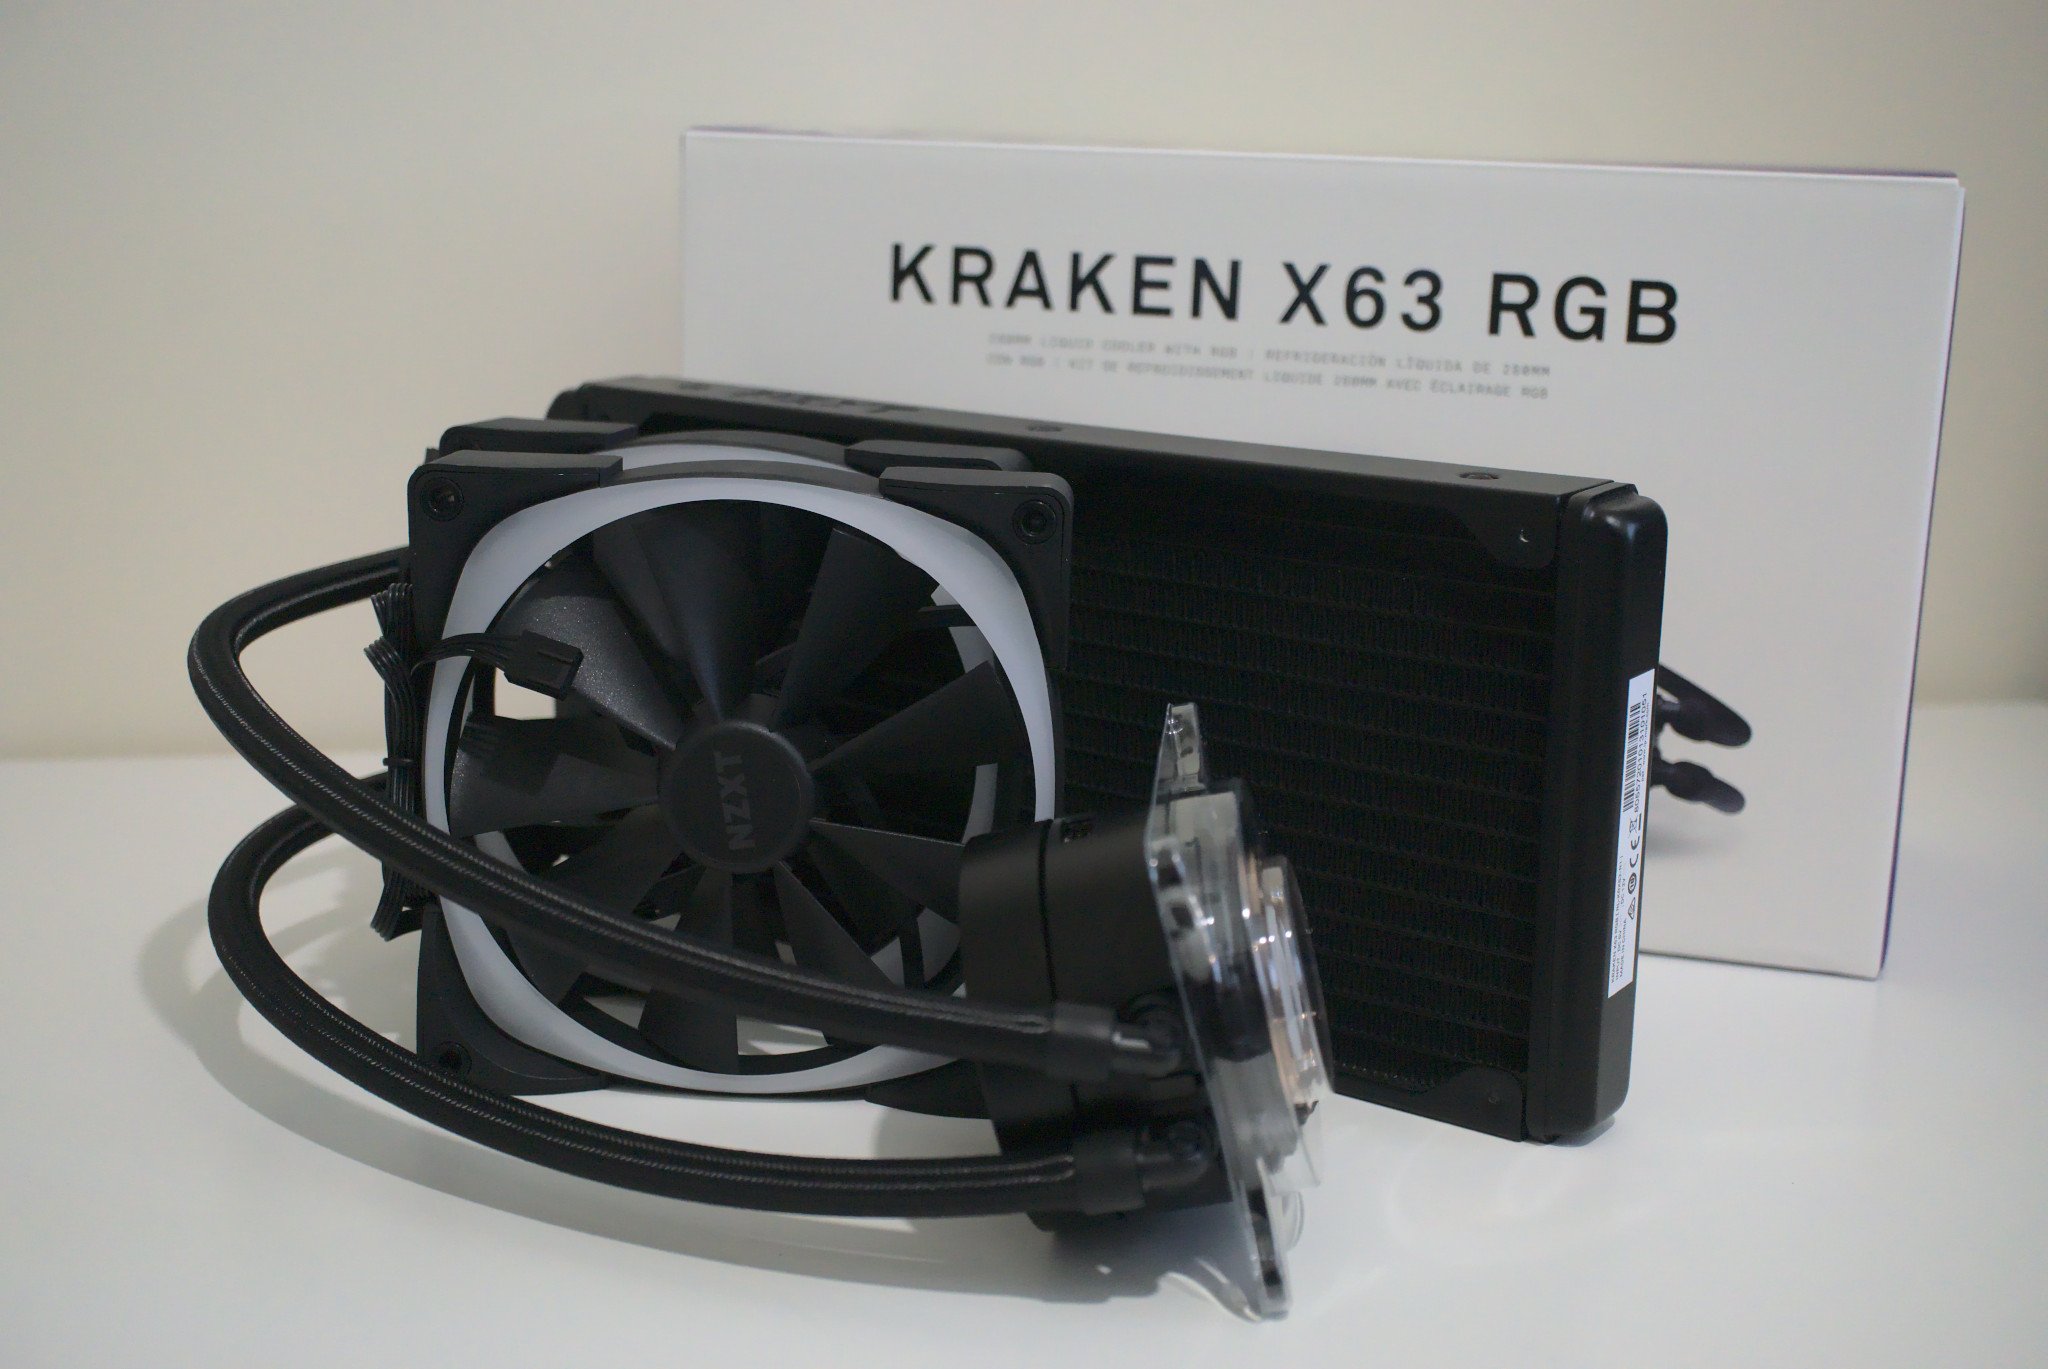 NZXT Kraken X63 RGB AIO review: Excellent cooling performance in a